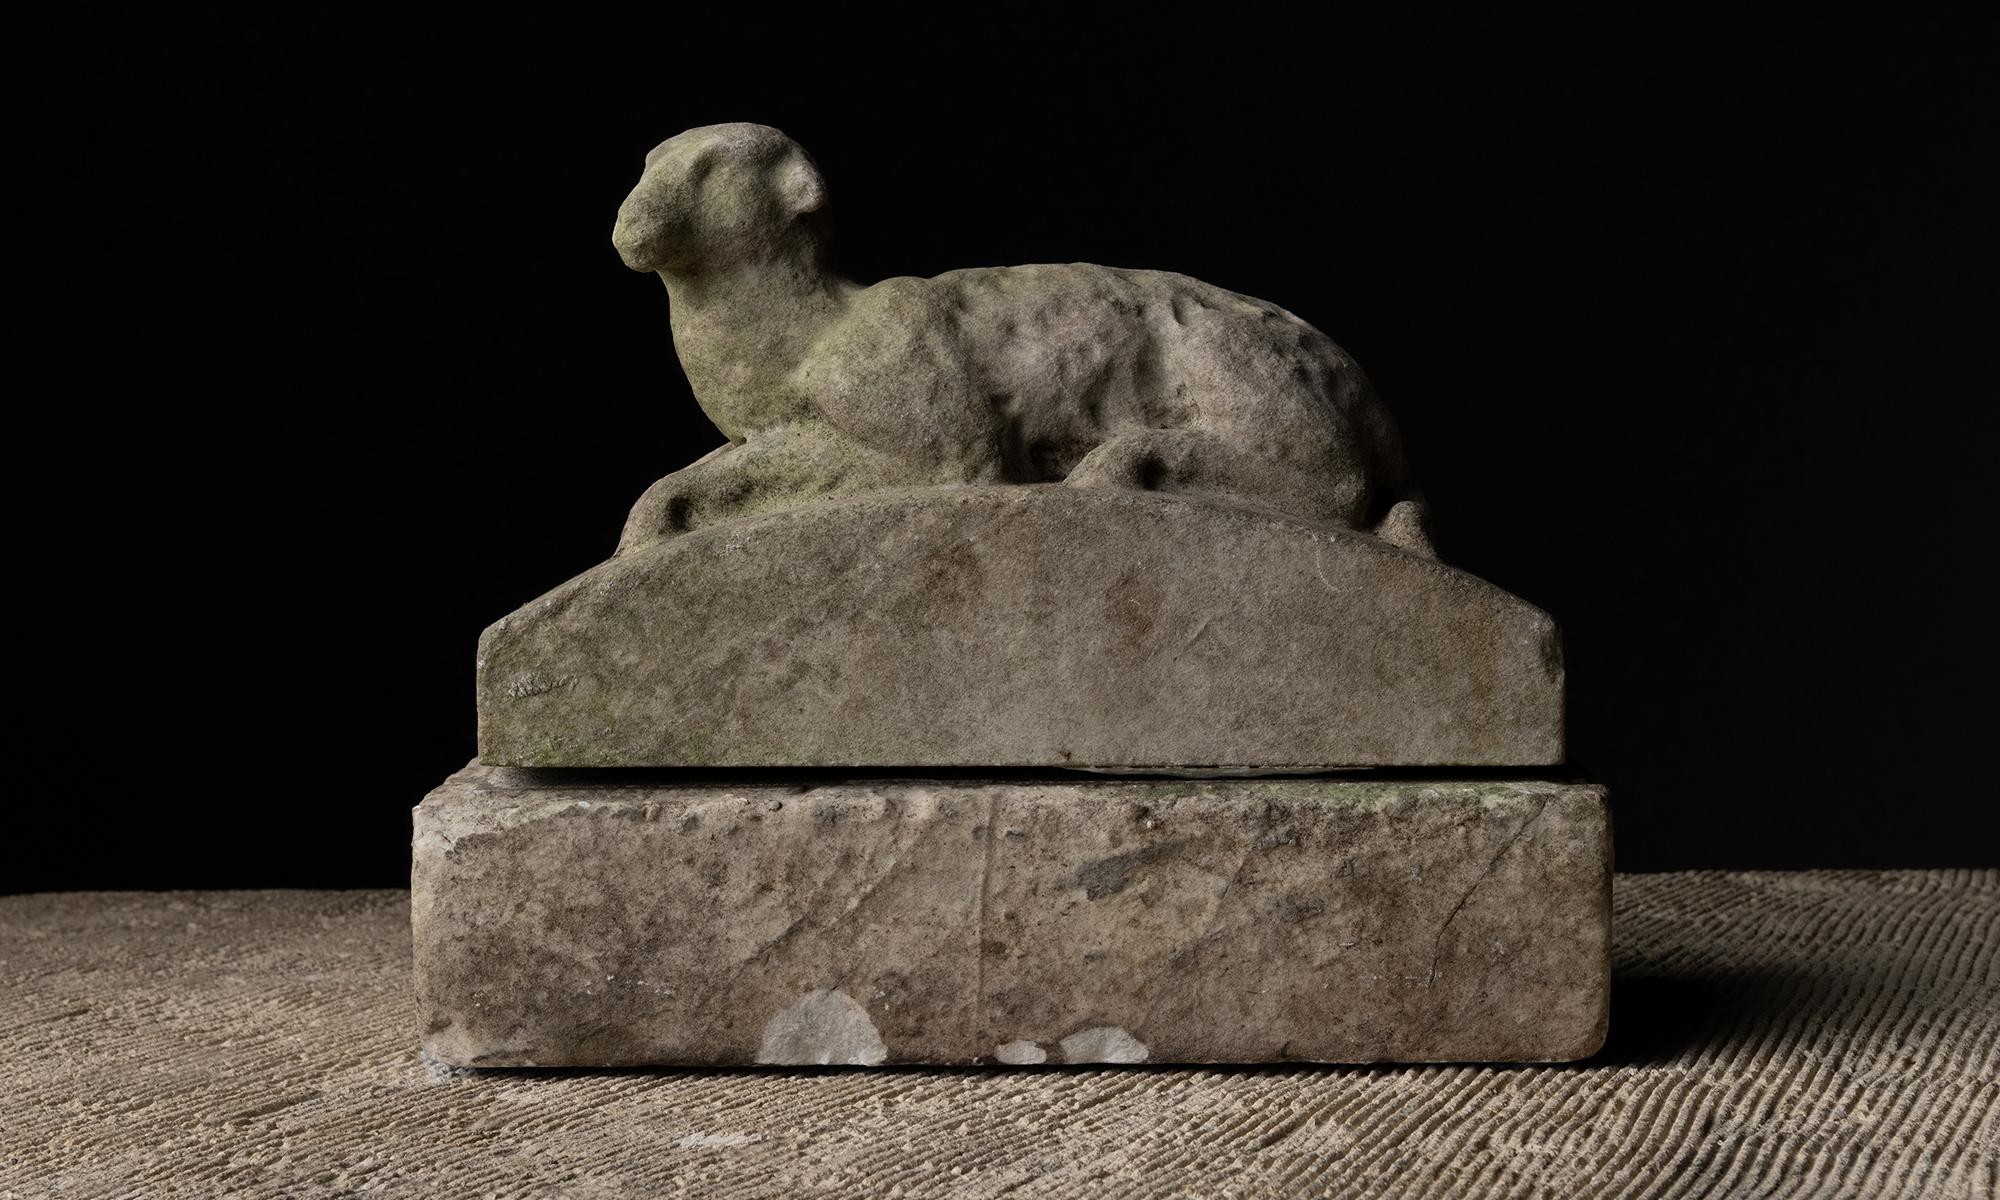 Italy circa 1840

Weathered marble sculpture of a sheep on a pedestal.

13”w x 6”d x 11”h